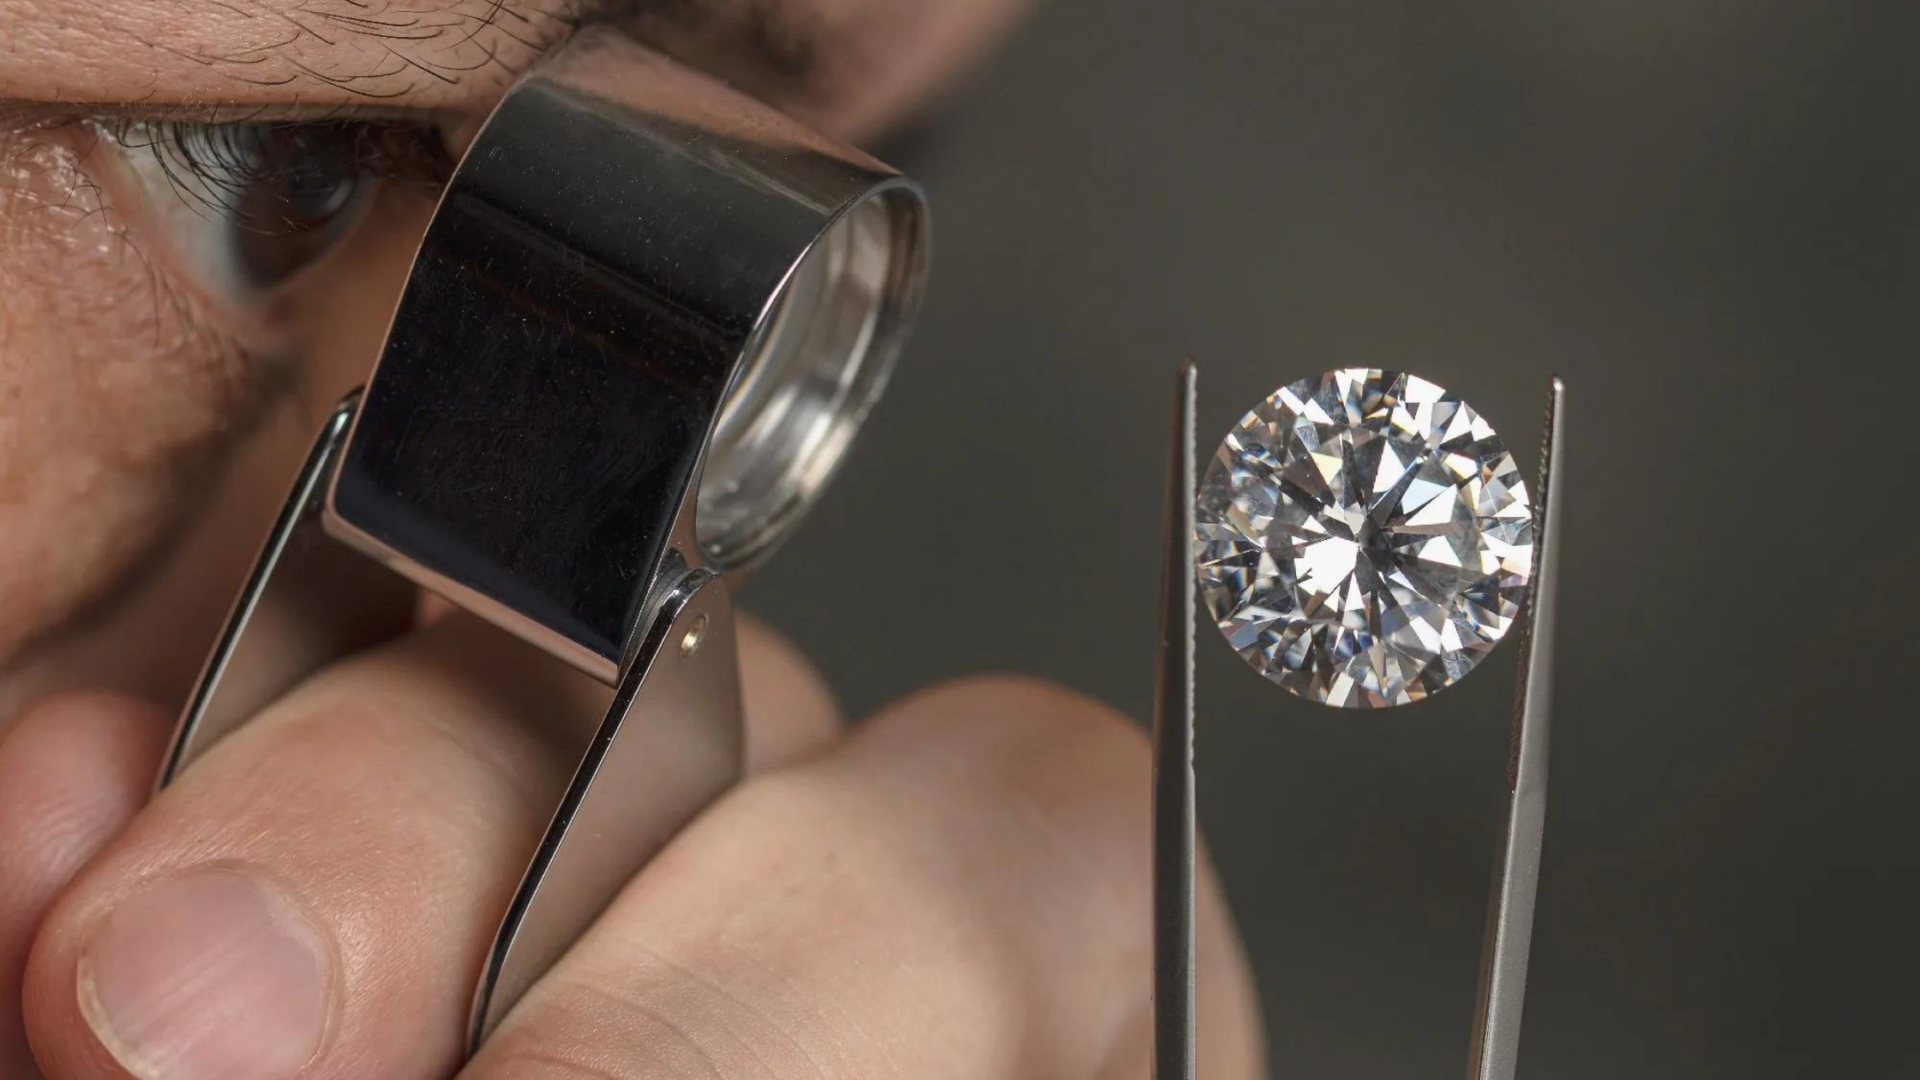 How To Tell Whether A Diamond Is Real Or Fake?